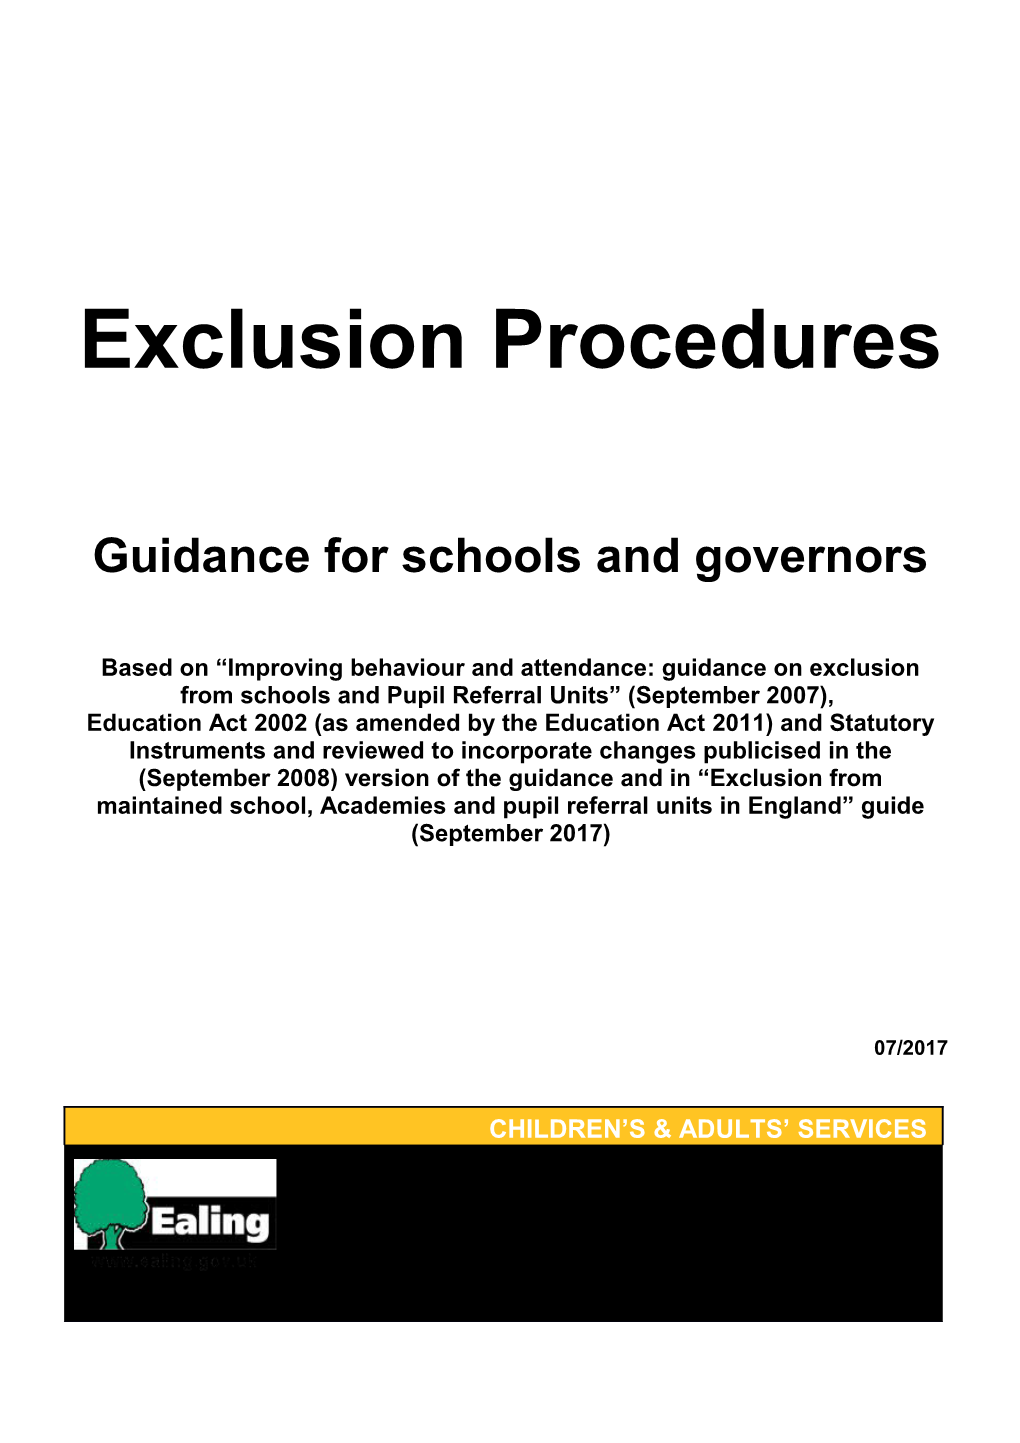 Guidance for Schools and Governors